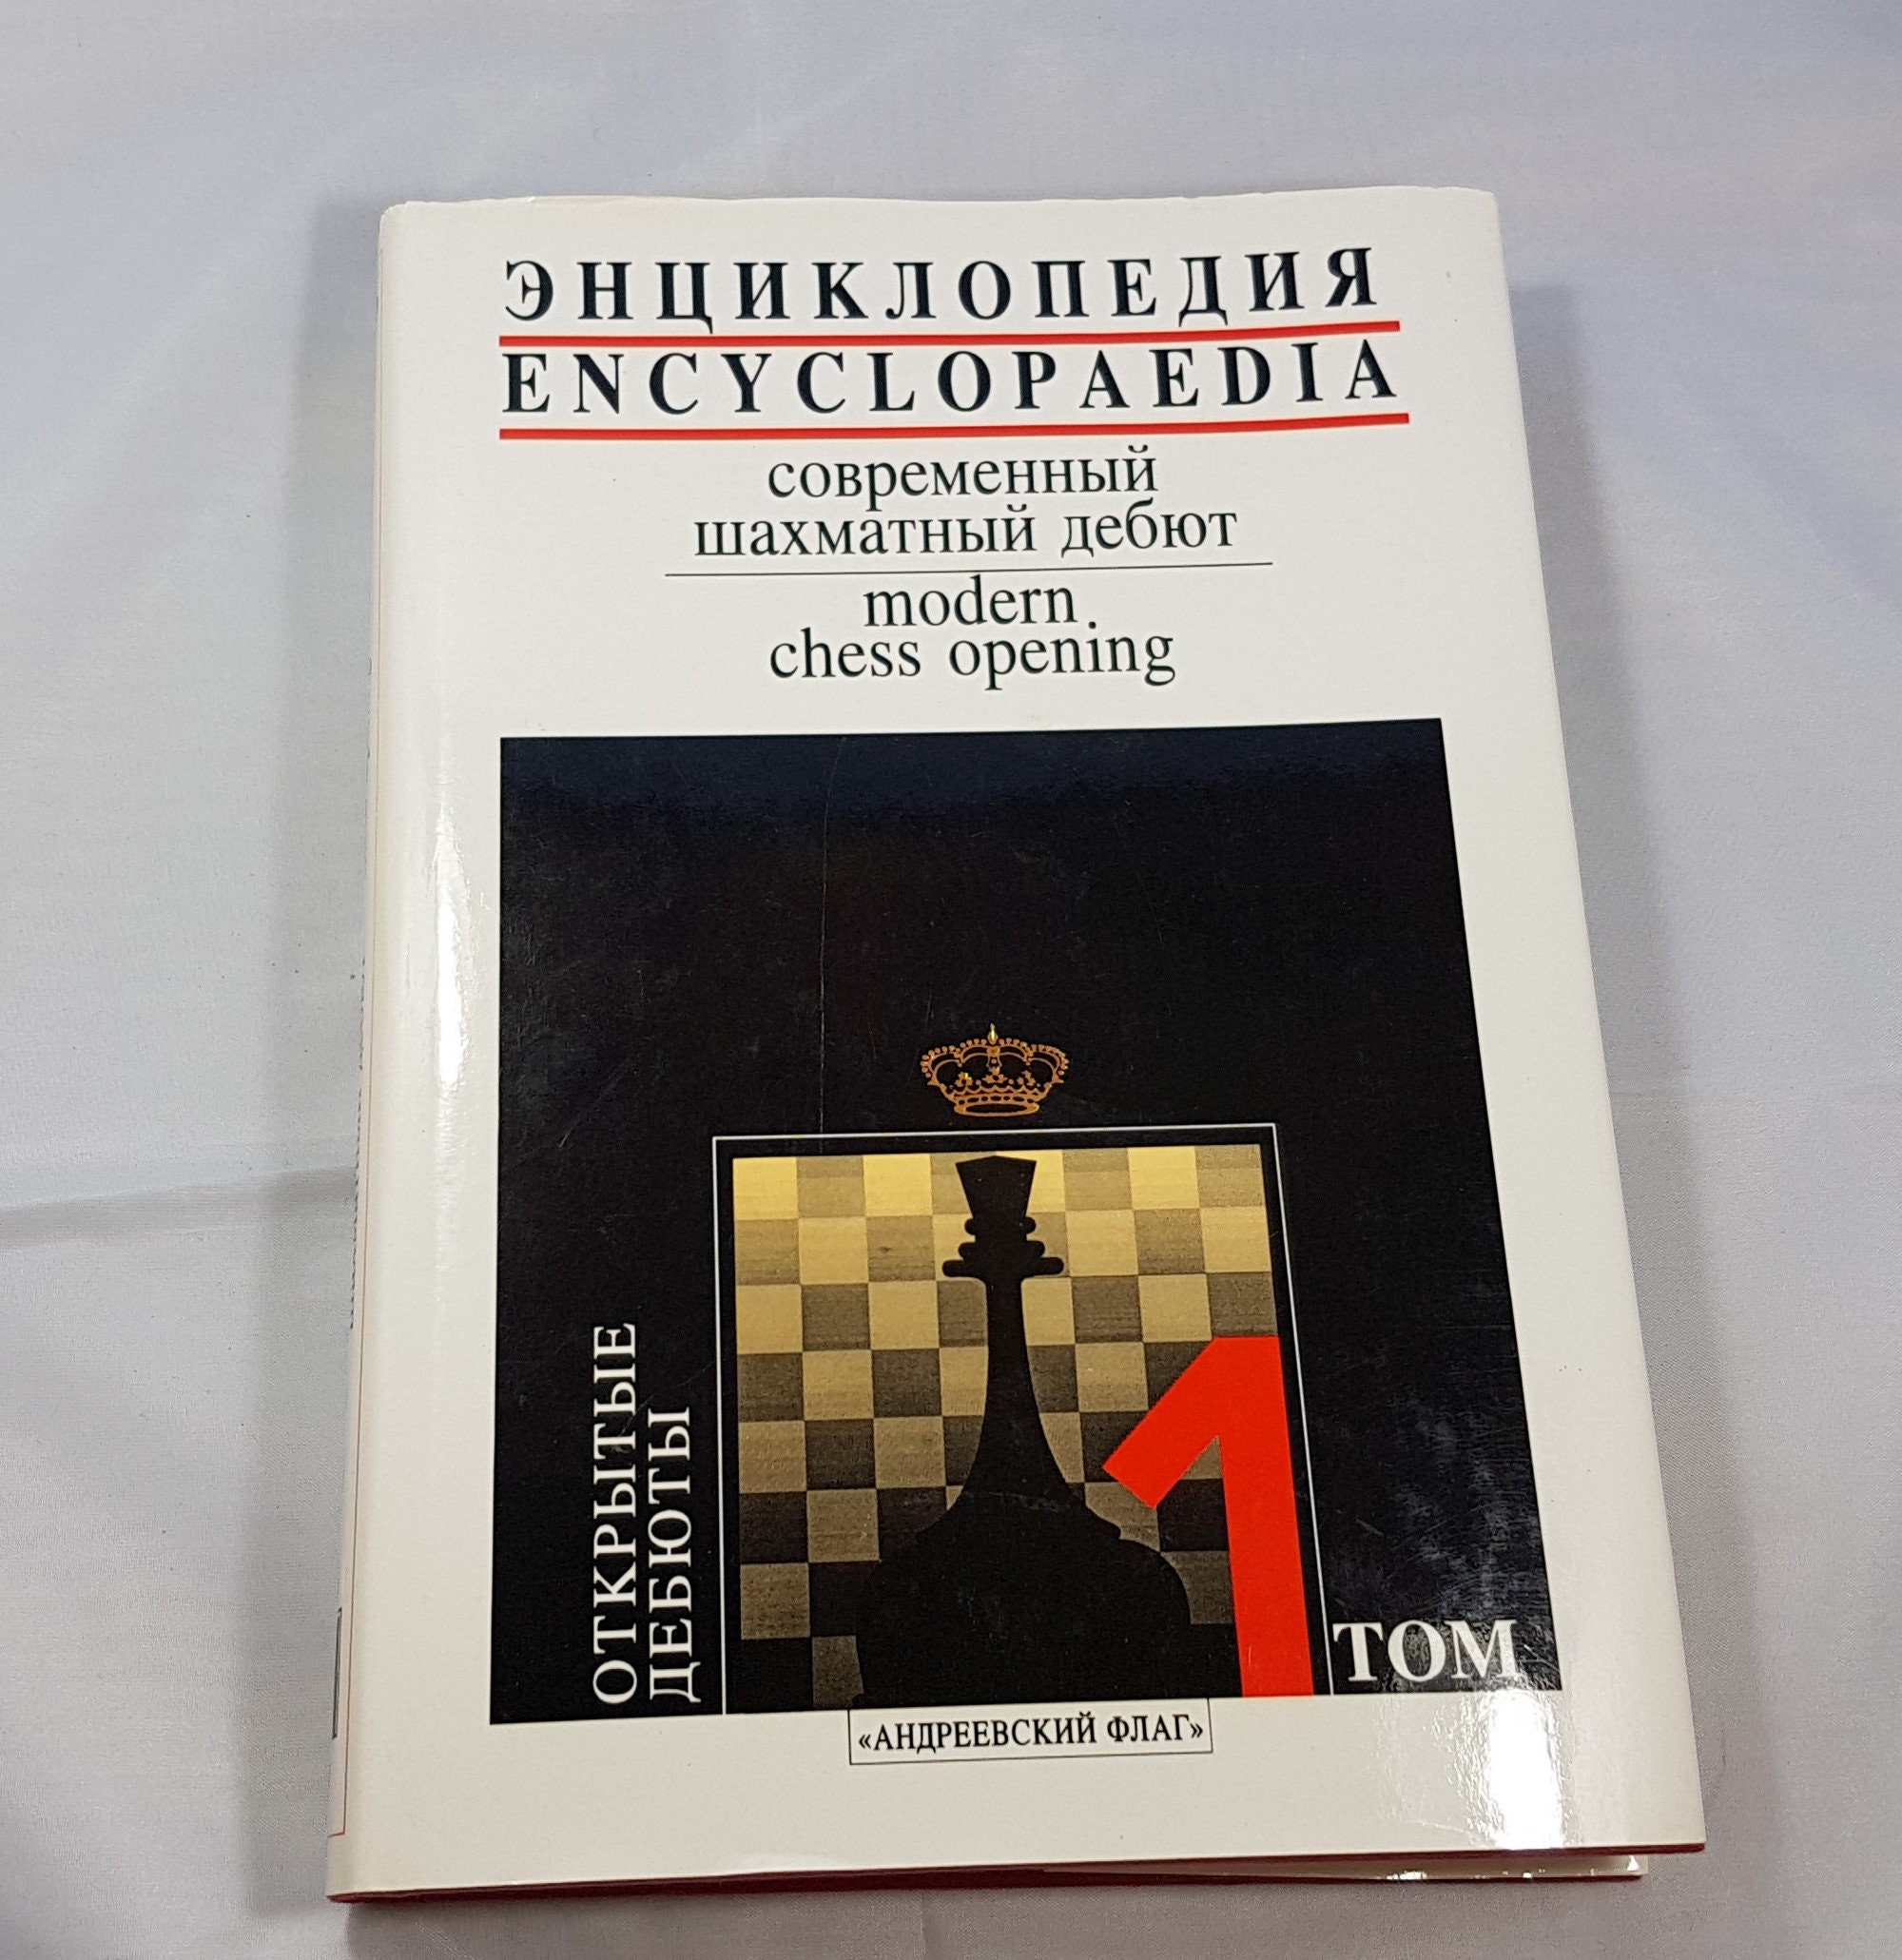 The Ruy Lopez Chess Opening in a vintage book cover poster style